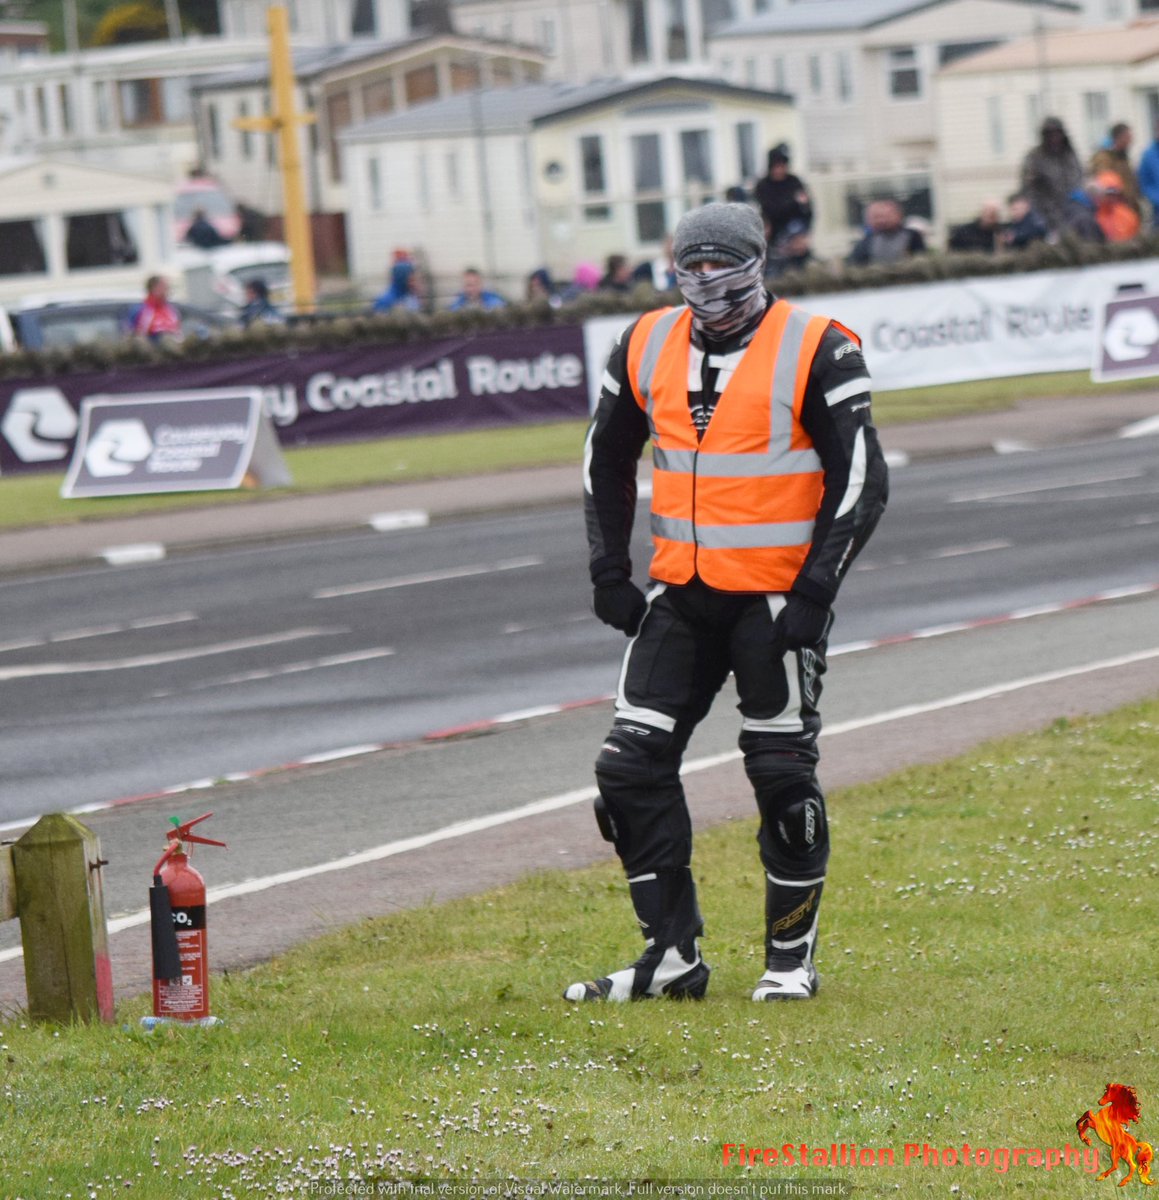 We had a fab week of weather at the #nw200 until Sat.where we froze from 7-6 ish but still loved it - not sure who this guy is but sums the weather up #nw200 #raceday @northwest200 #juniperchicane @Official_RRI #irishroadracing please tag if you know him #firestallionphotography